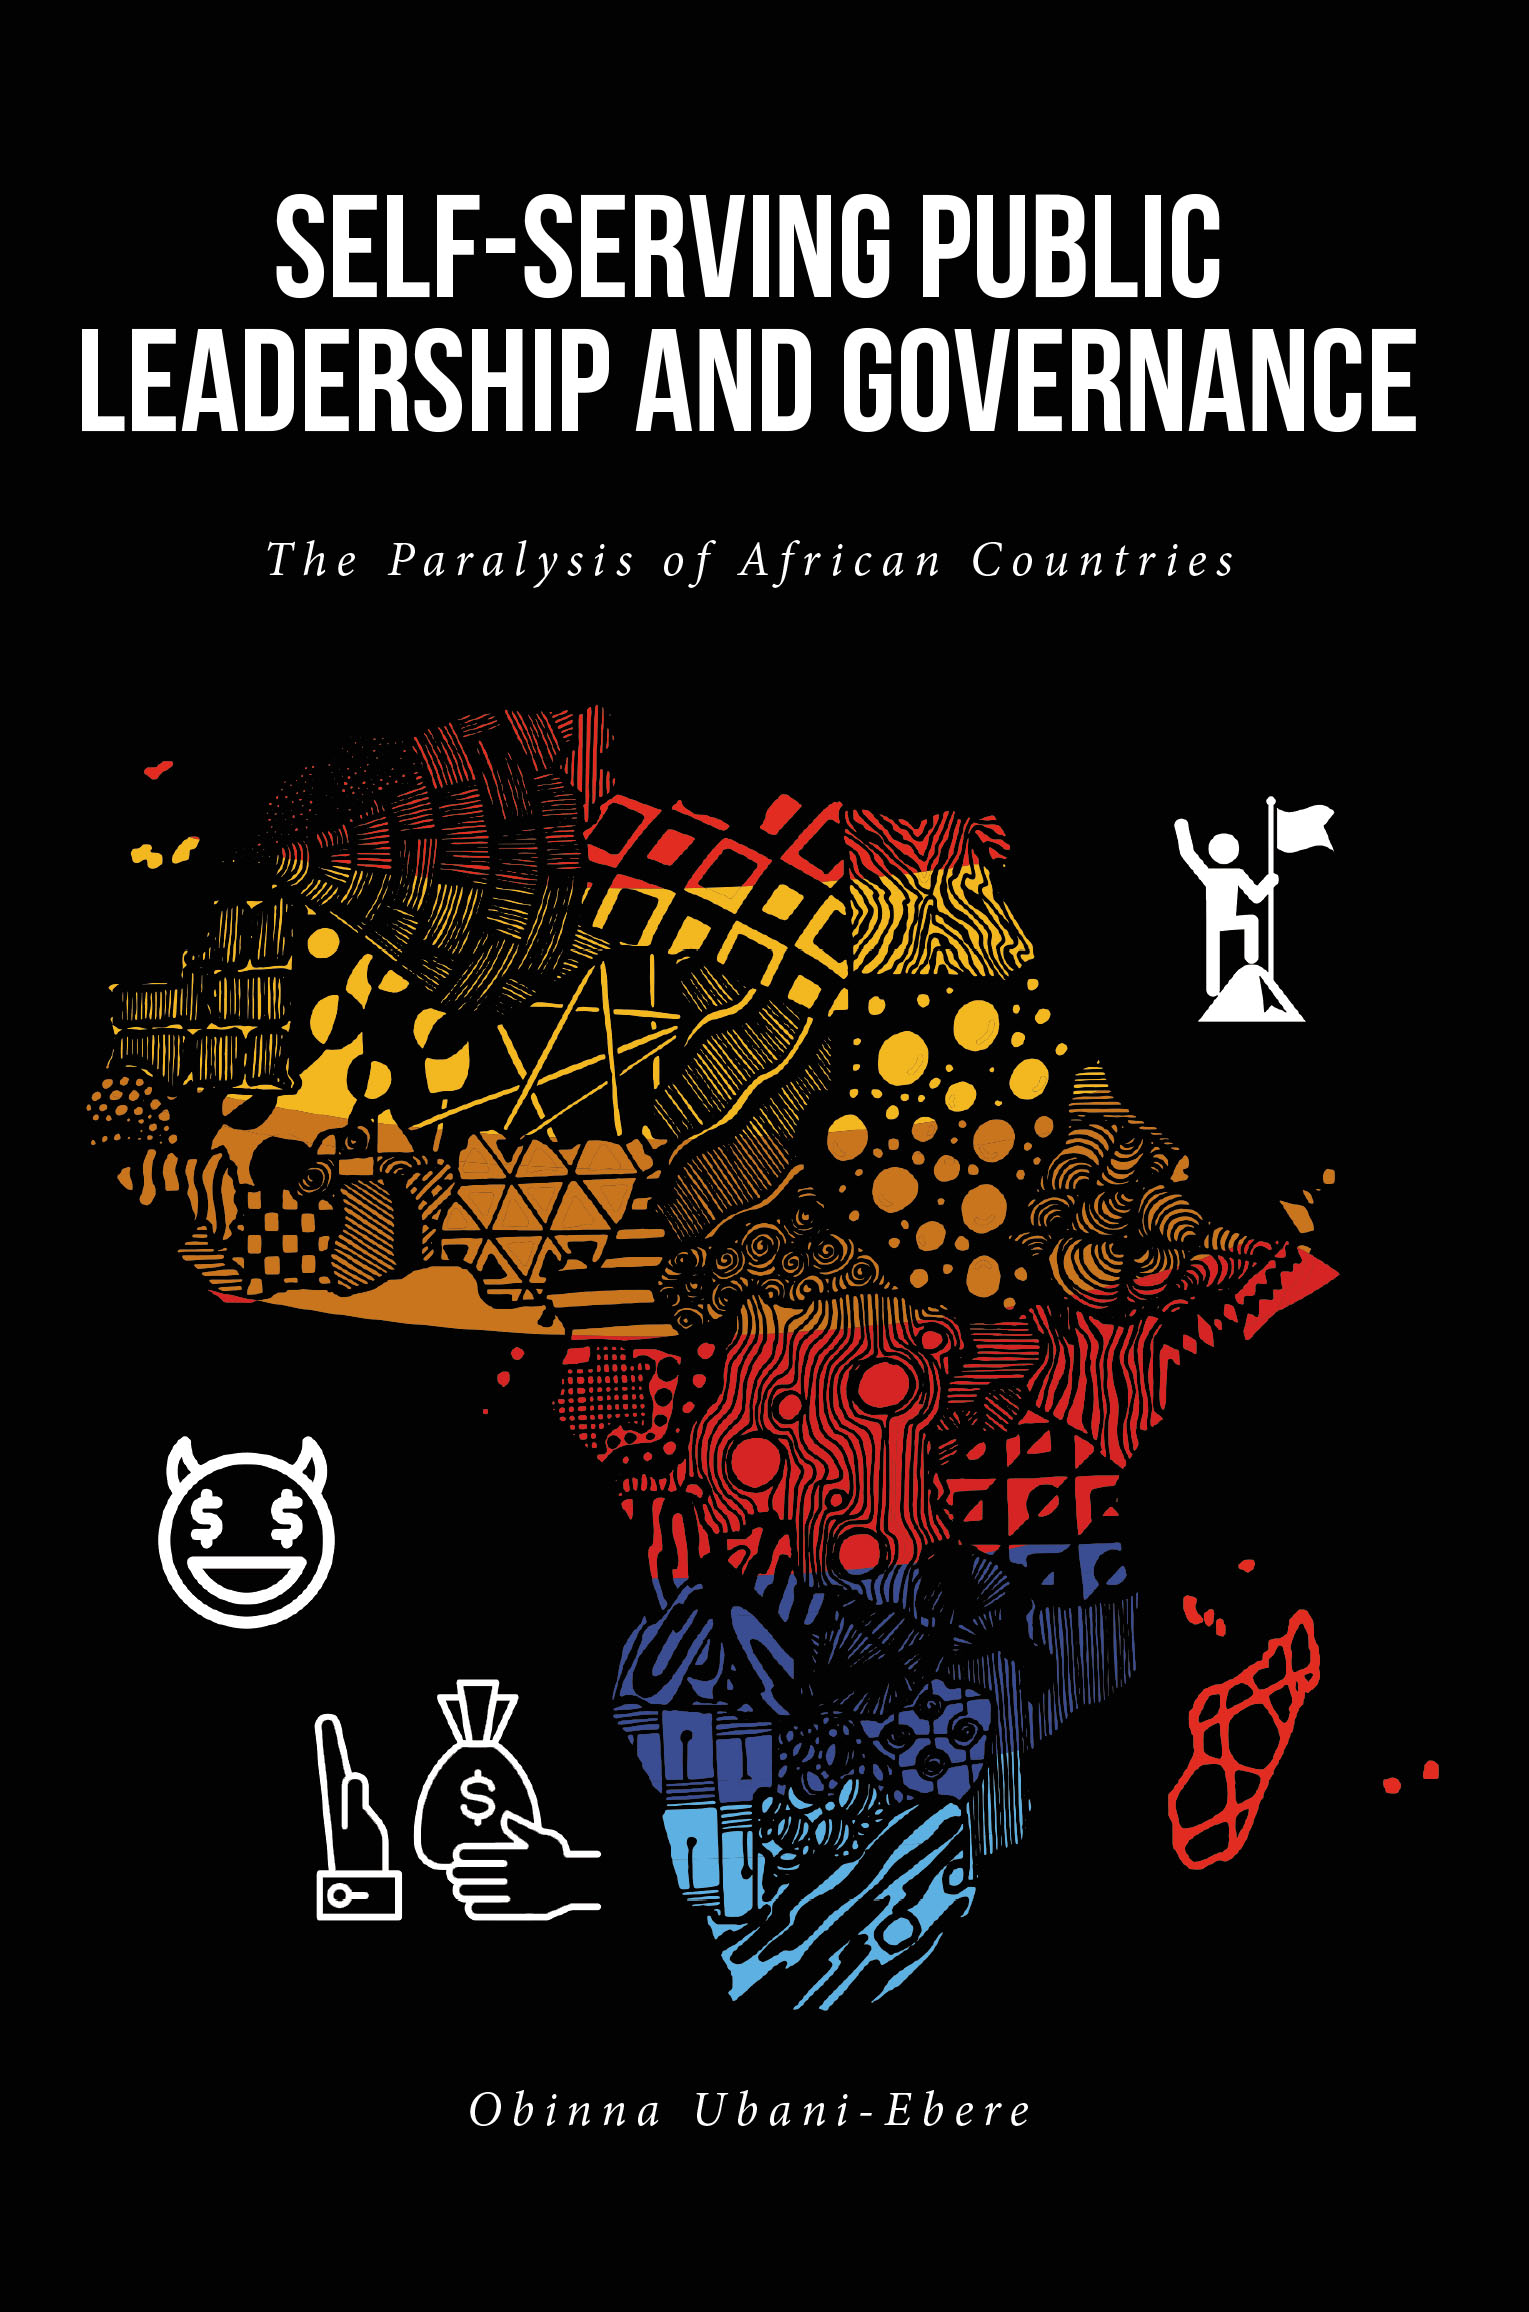 Obinna Ubani-Ebere’s New Book, "Self-Serving Public Leadership and Governance," Examines How Corruption and Failed Leadership Have Kept African Nations from Advancement